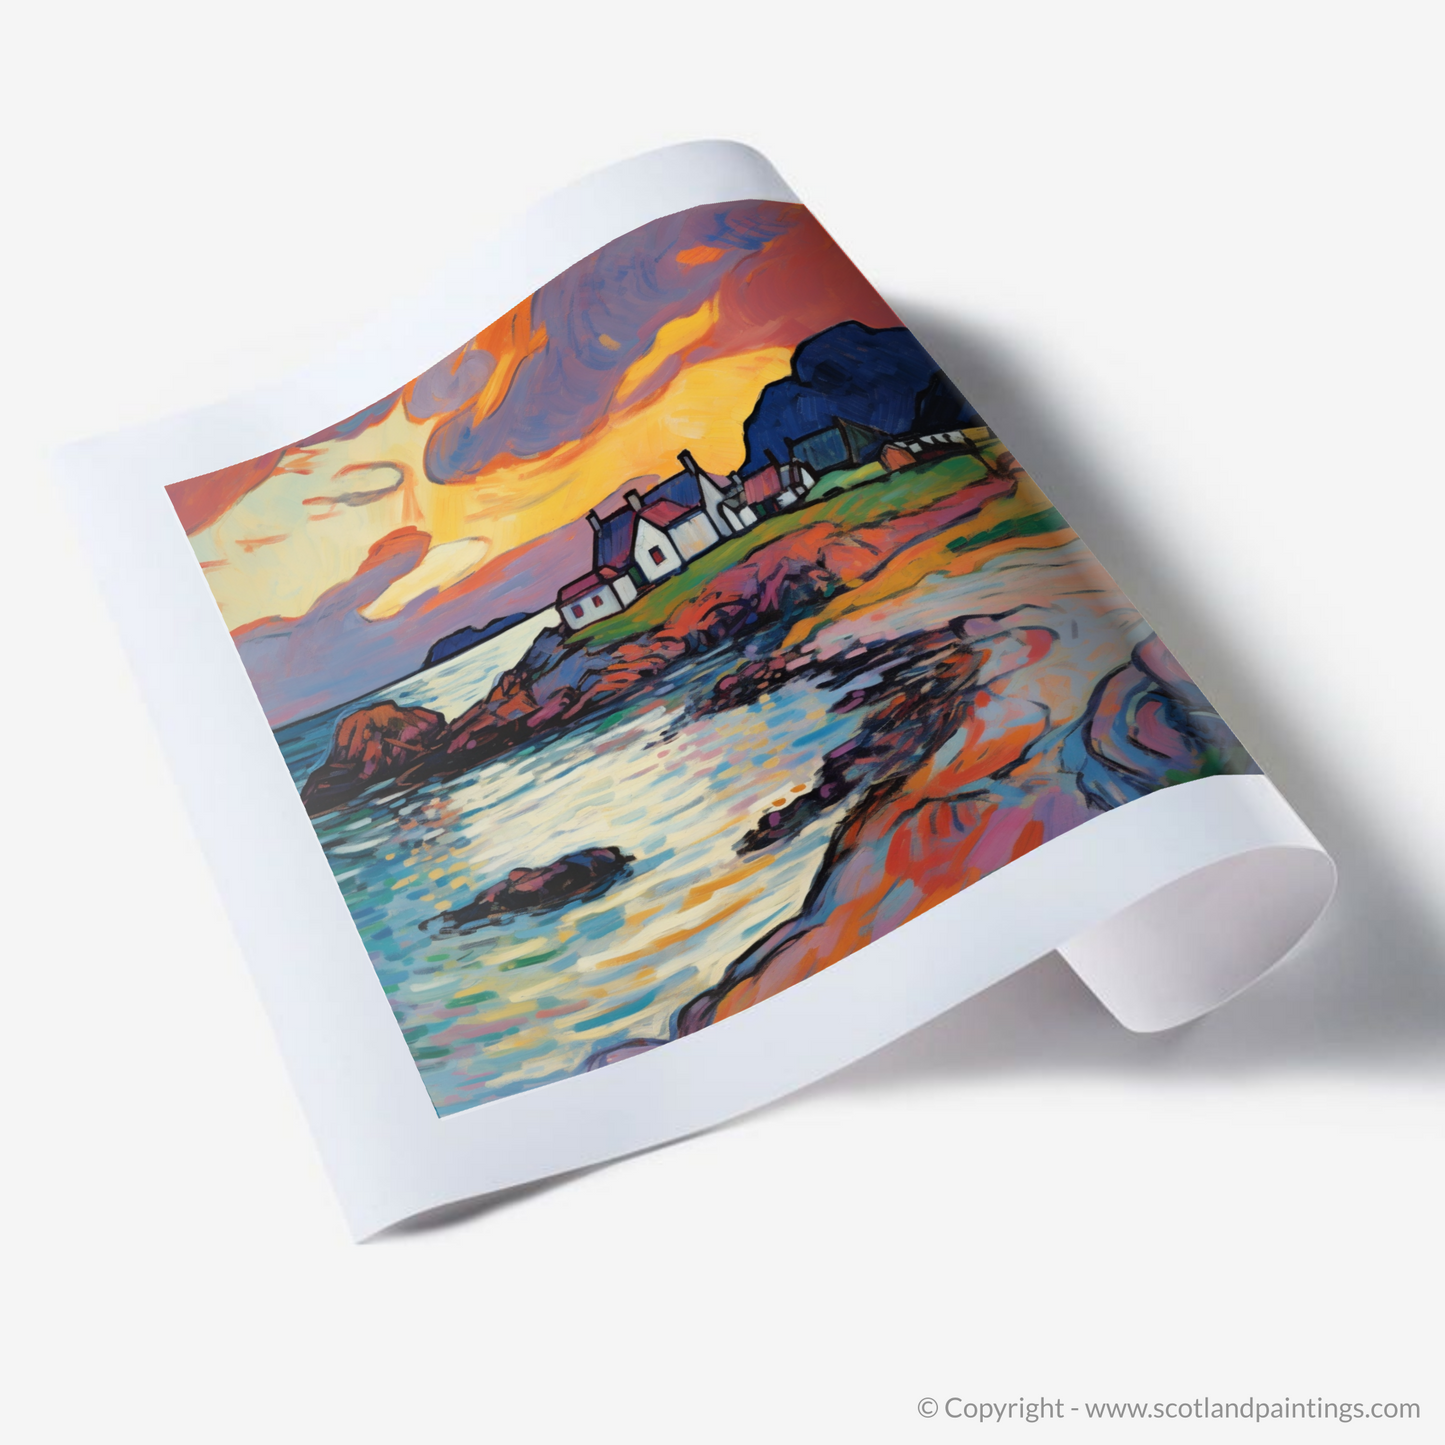 Isle of Iona: Fauvist Symphony of the Inner Hebrides